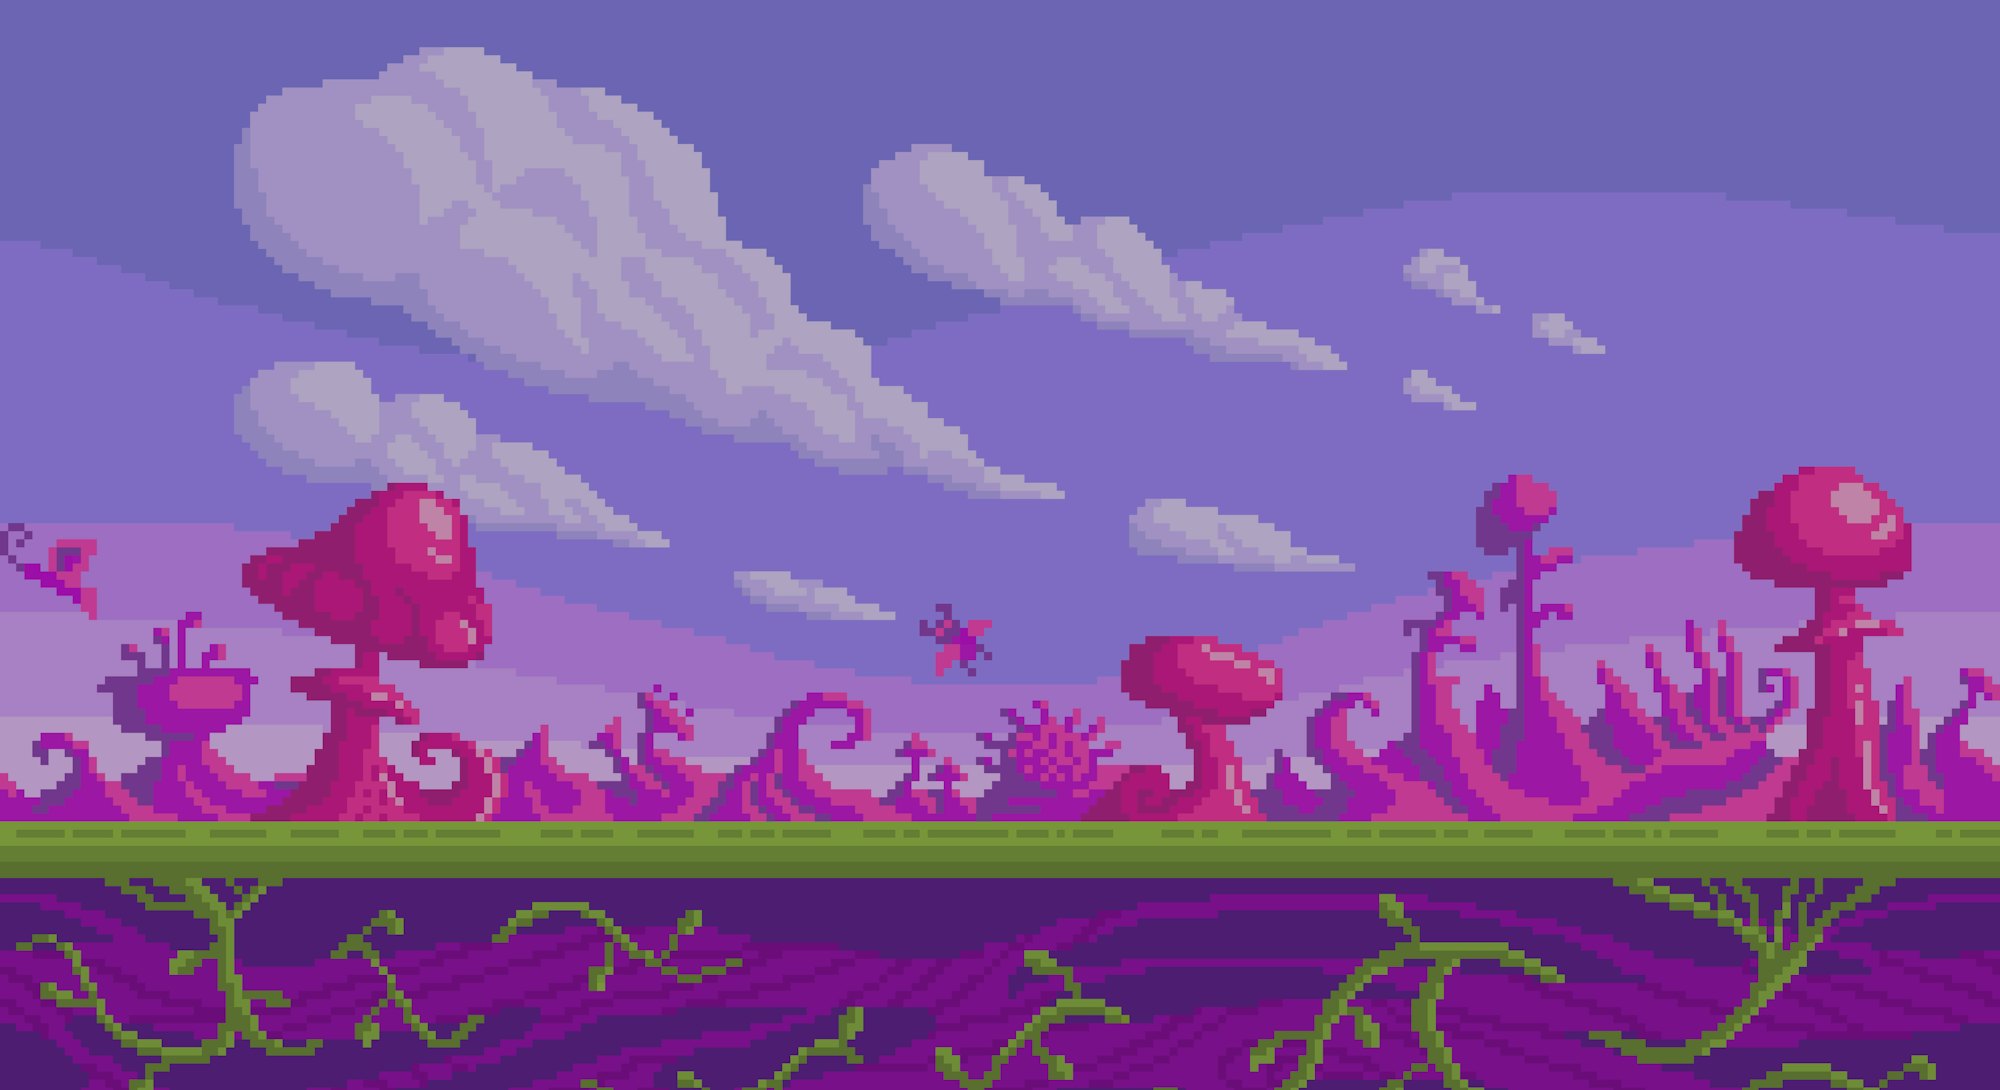 Pixel art game location. Cute pink mushrooms area. Seamless vector background.